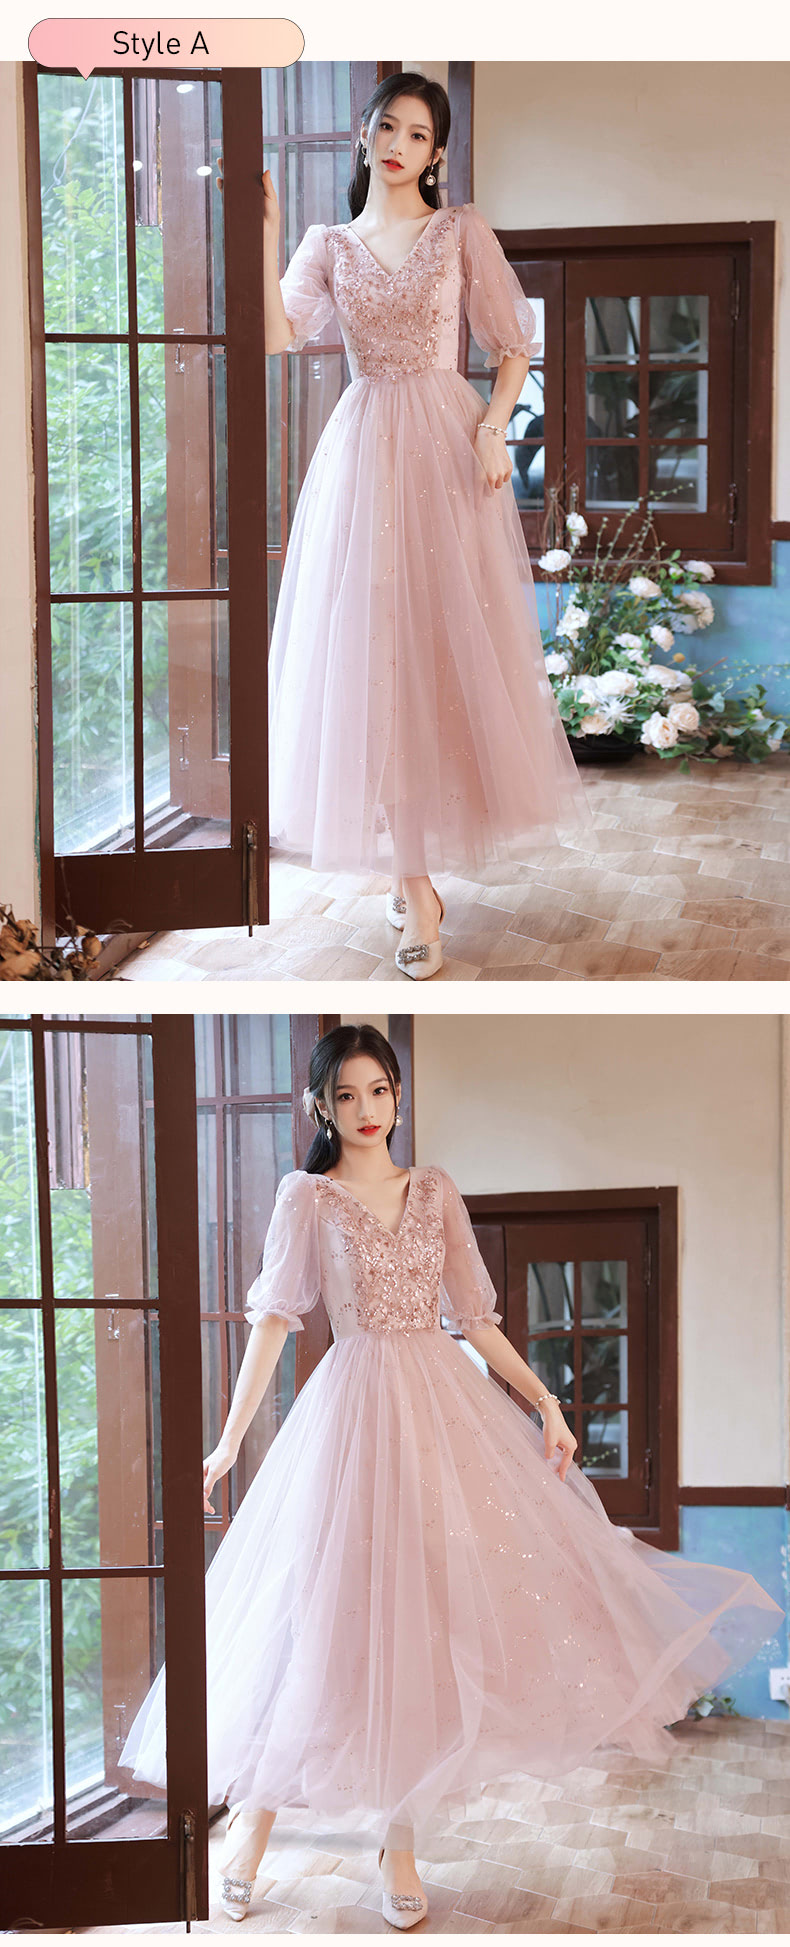 Cameo-Lace-Tulle-Bridesmaid-Maxi-Dress-Bridal-Party-Formal-Gown18.jpg